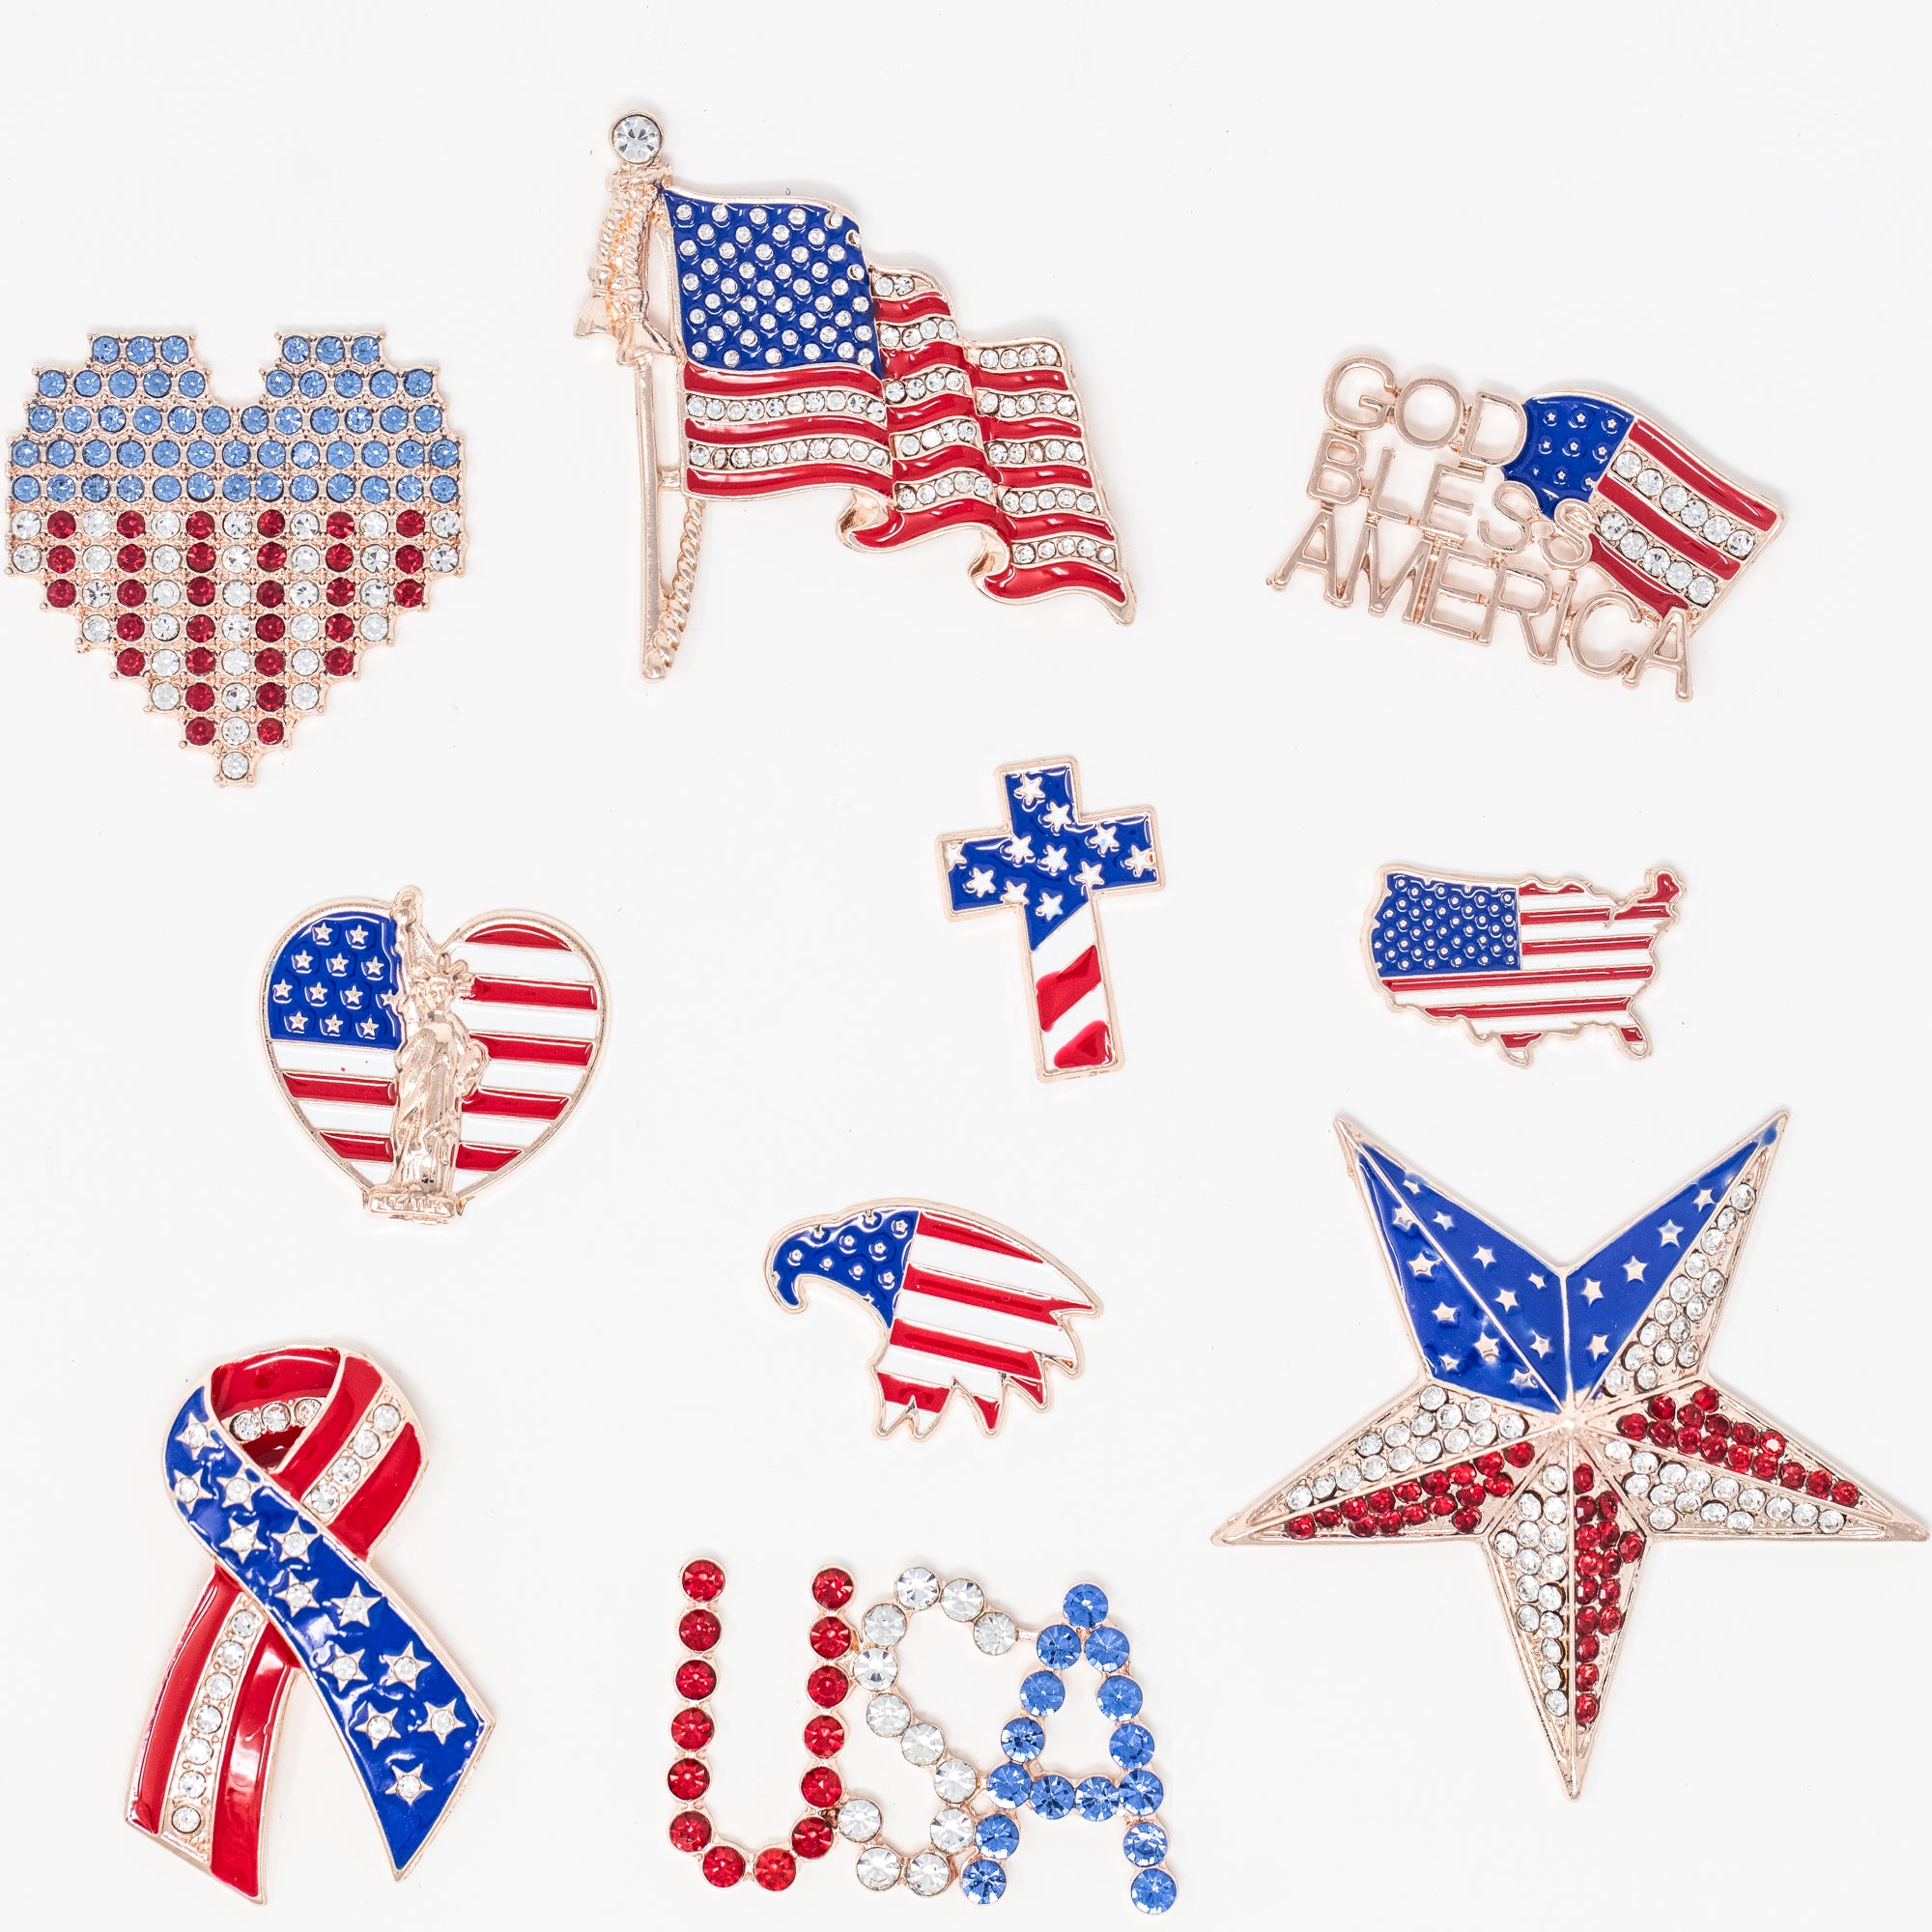 Patriotic Embellishments for Crafts USA Bling